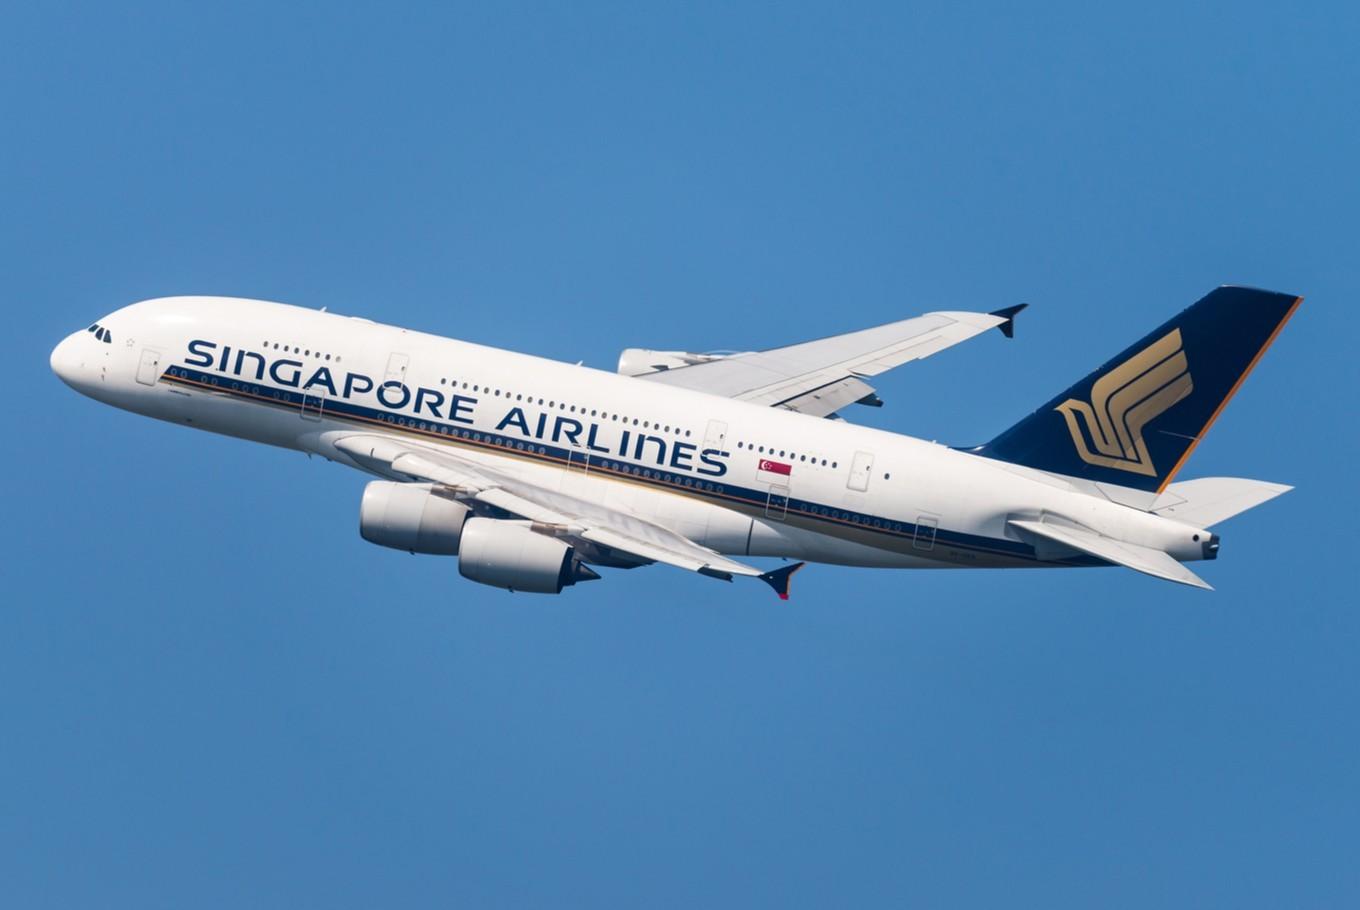 Singapore Airlines Group Operates Flights with Fully-Vaccinated Crew